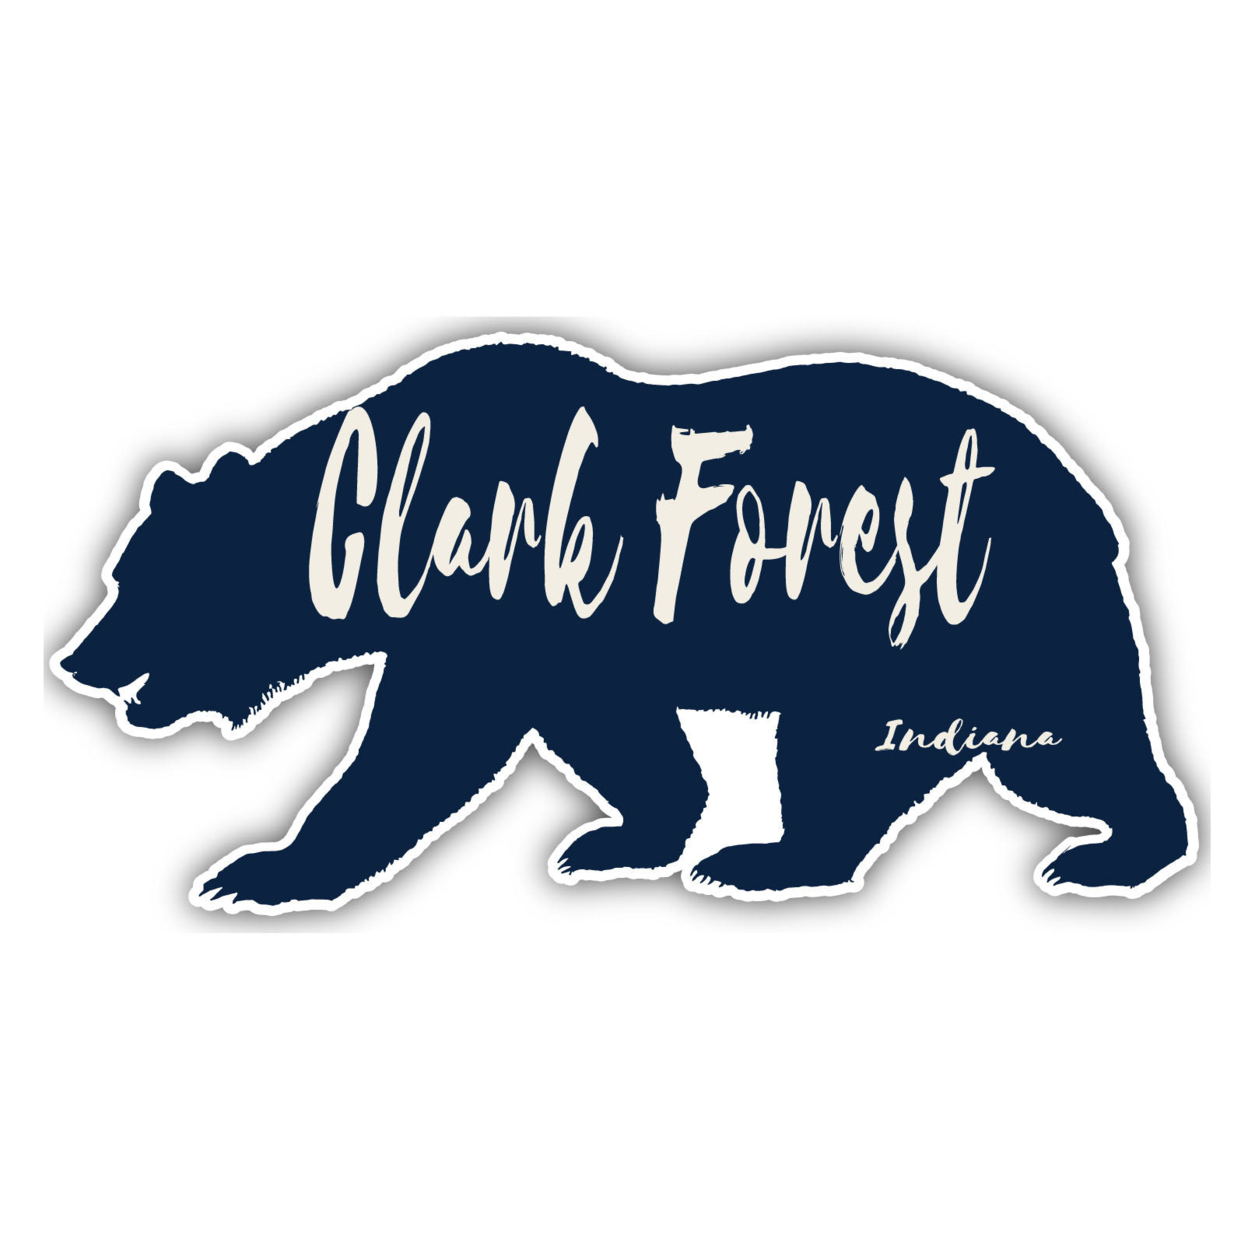 Clark Forest Indiana Souvenir Decorative Stickers (Choose Theme And Size) - Single Unit, 6-Inch, Bear